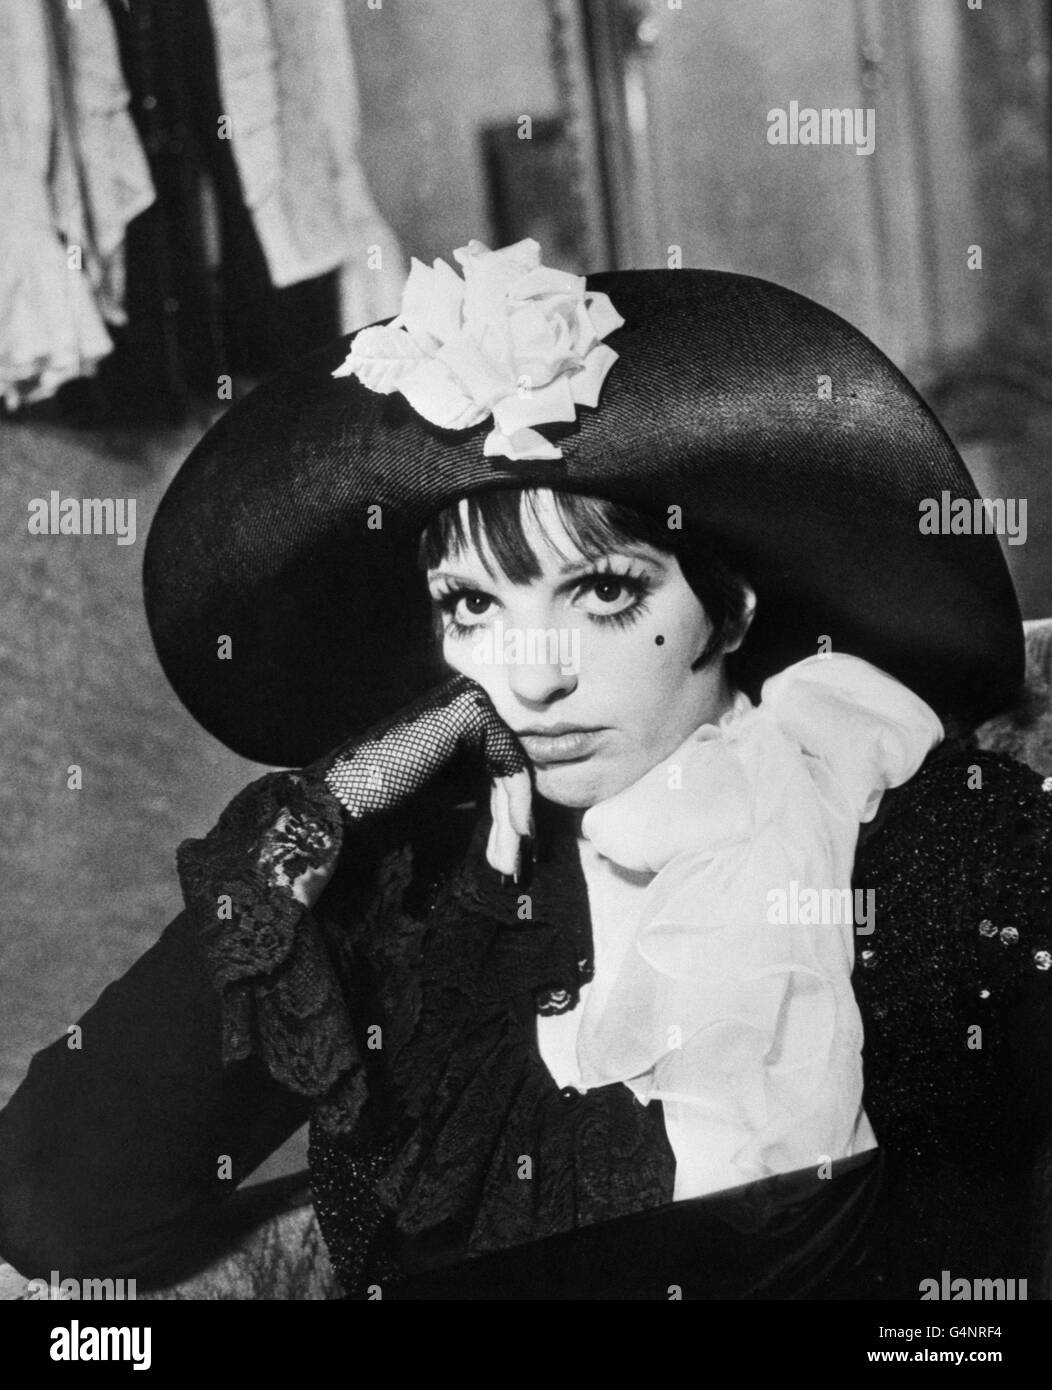 Back in the 1930's, the late Judy Garland was a child star, now her daughter Liza Minnelli is to star in a film with a 30's flavour. Liza, shown here in a scene from Cabaret, plays a cabaret singer, Sally Bowles, a character originally created by Christopher Isherwood, and set against a background of Berlin and the Nazi's rise to power. The film is being produced by Cy Feuer, and directed-Choreographed by Bob Fosse on location in West Germany. Cabaret, is an ABC Pictures Corp, and Allied Artist Pictures Corporation presentation. Stock Photo